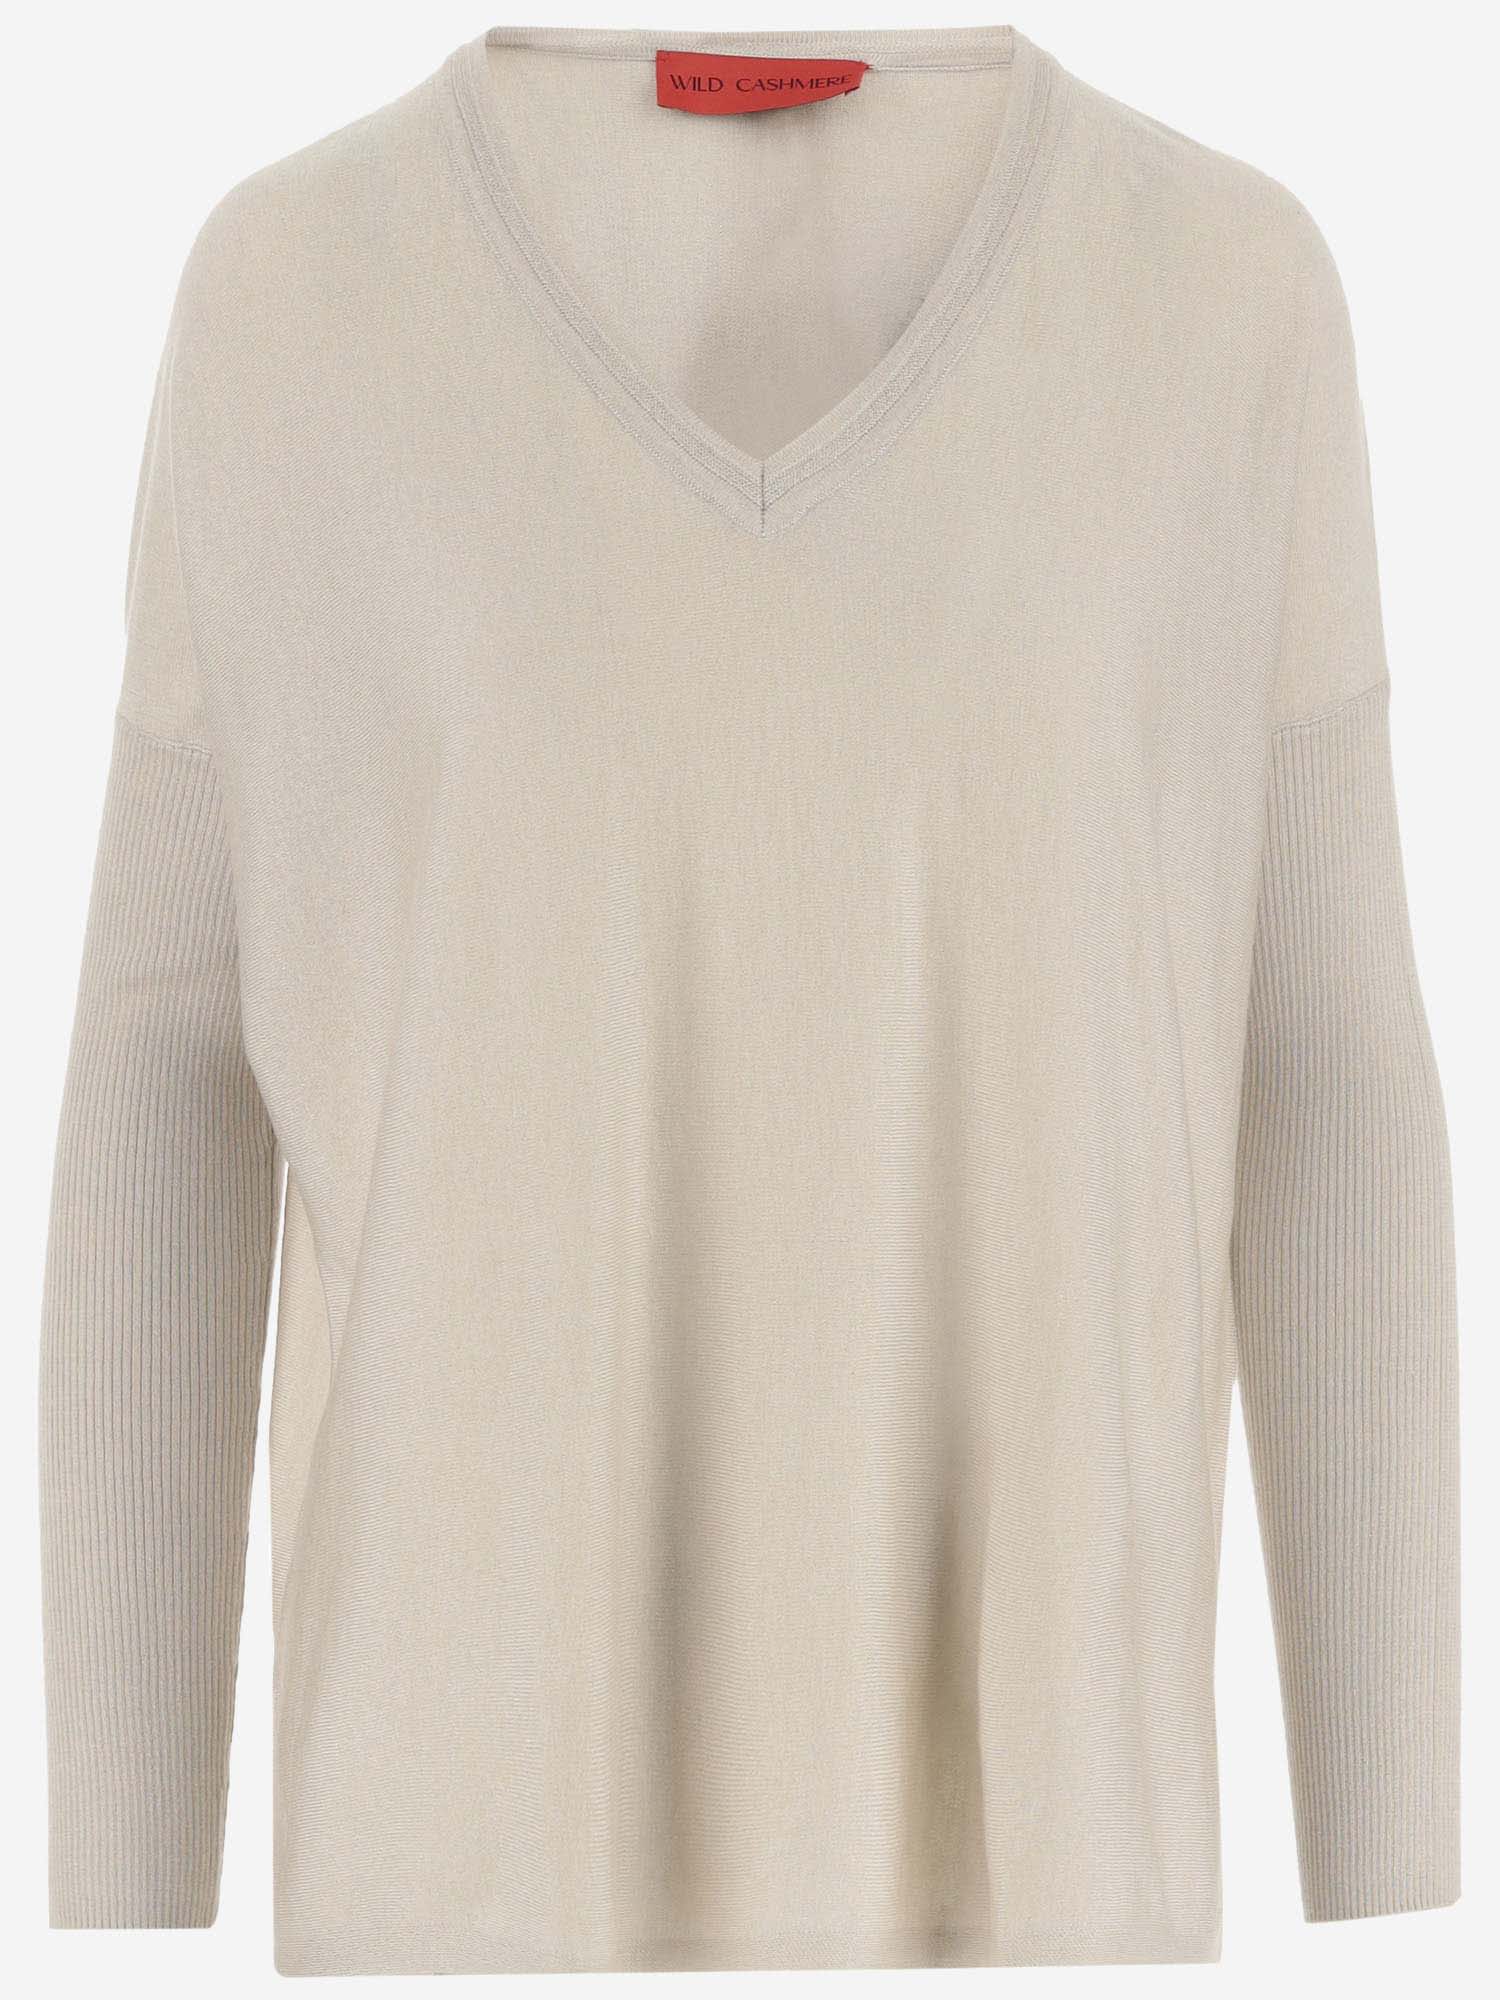 Wild Cashmere Silk And Cashmere Blend Pullover In Ivory